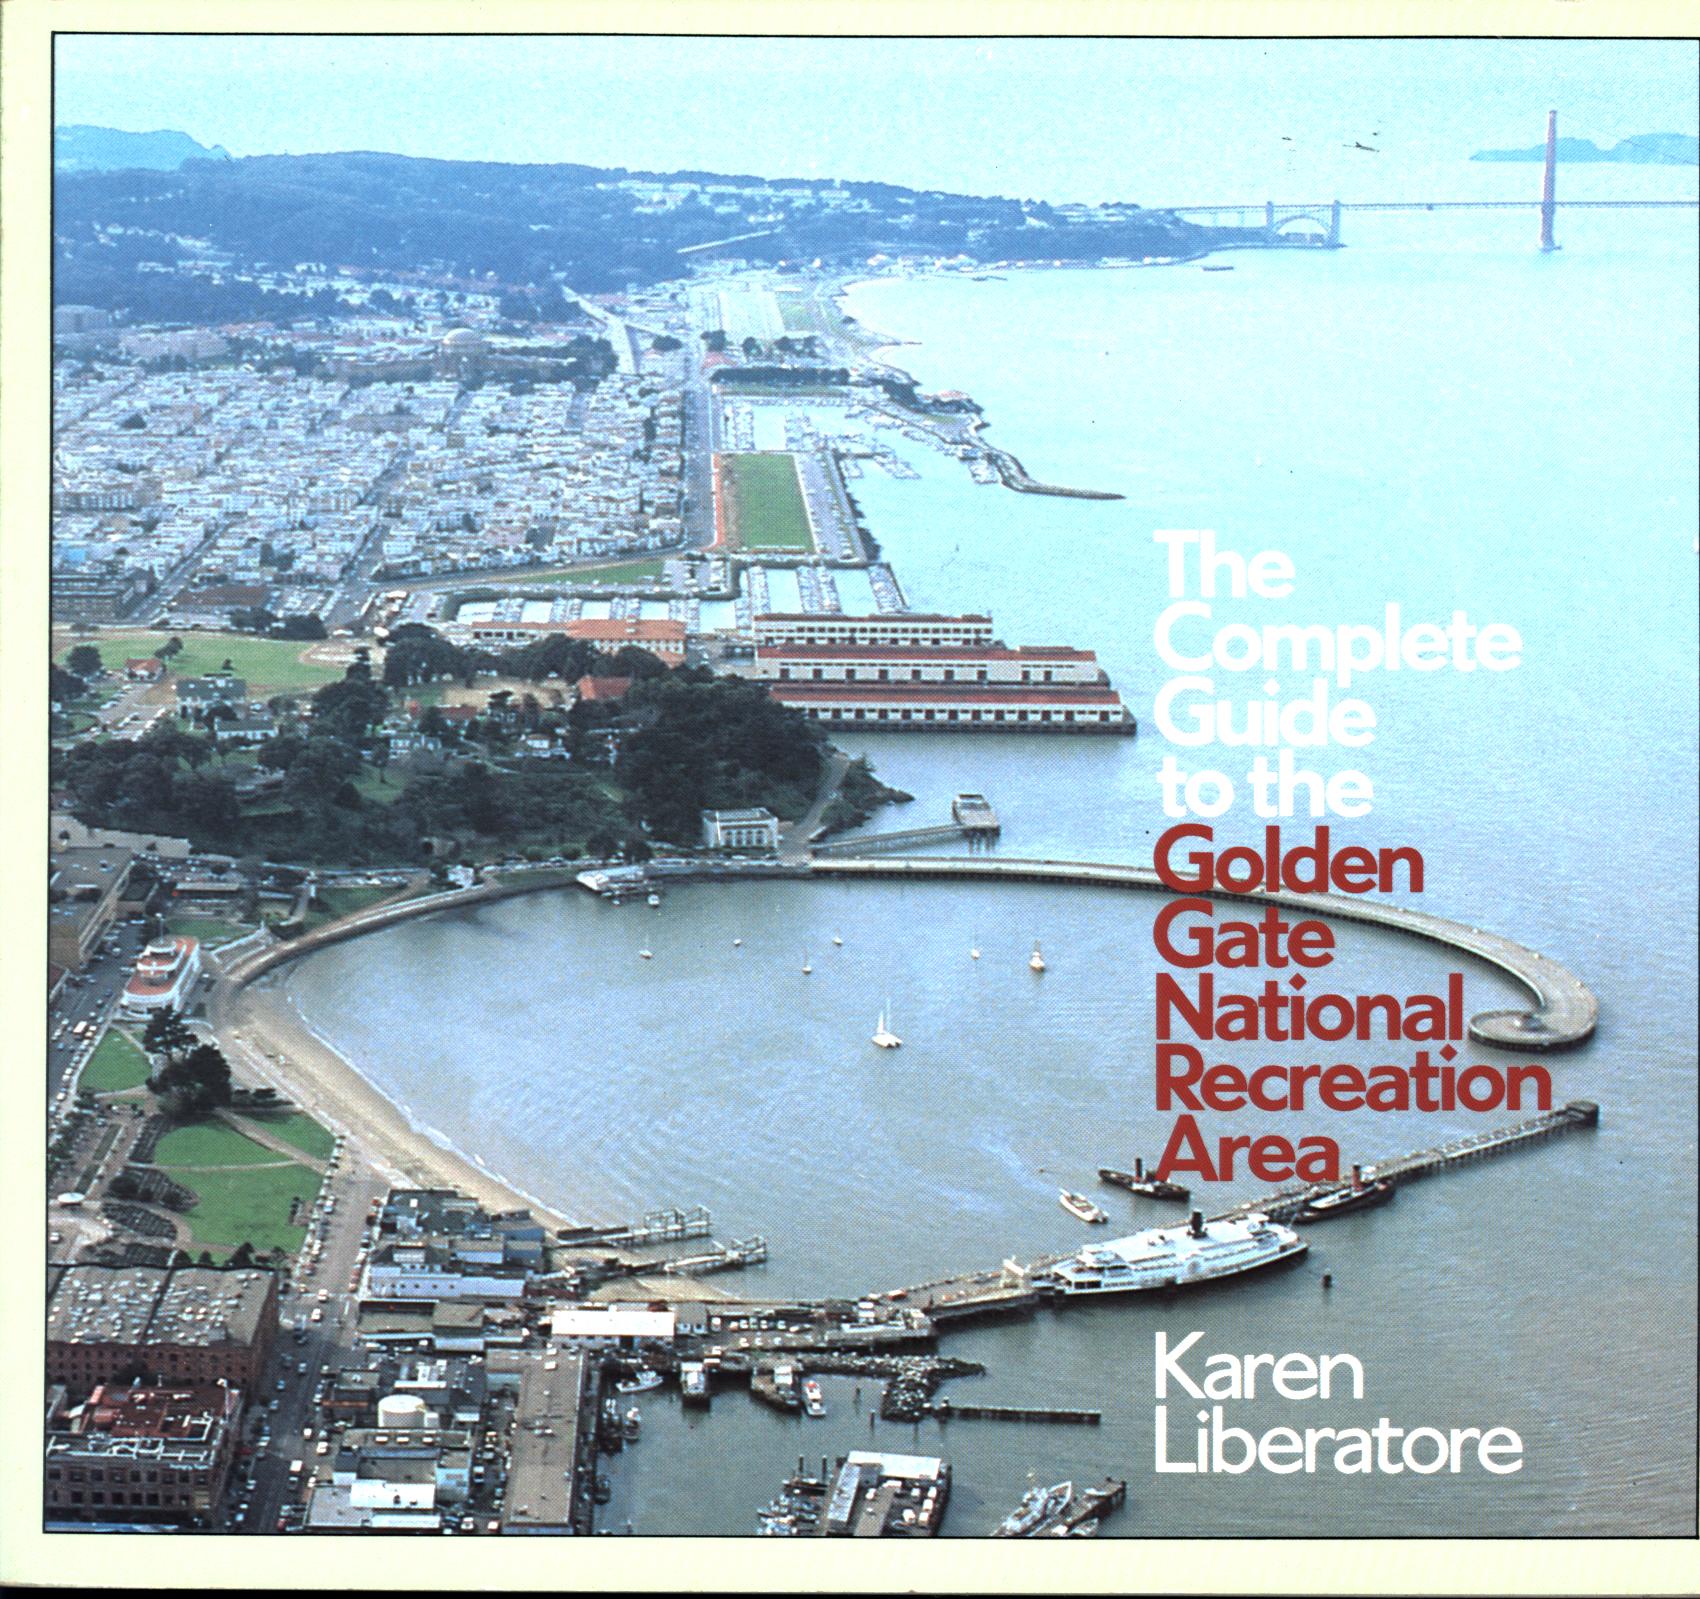 THE COMPLETE GUIDE TO THE GOLDEN GATE NATIONAL RECREATION AREA (CA). 